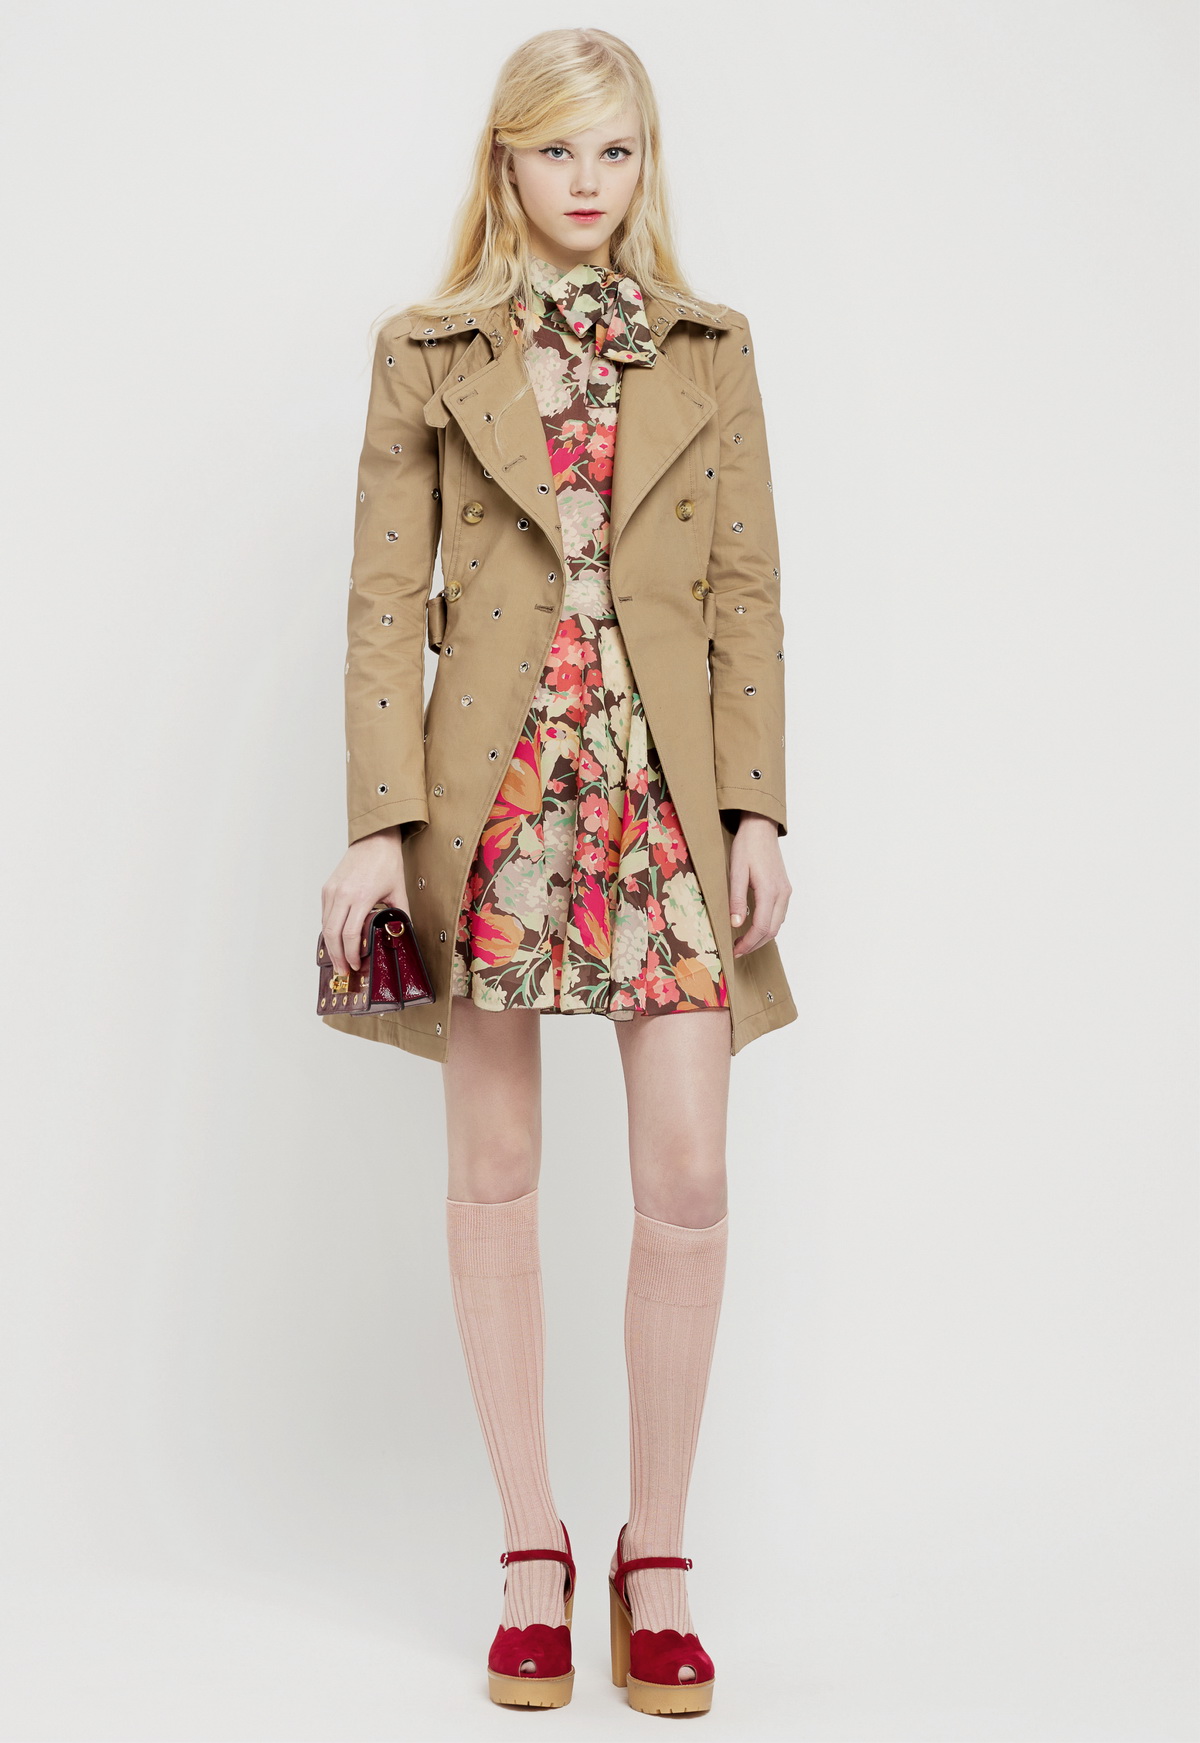 RED-FW15-16-STYLE-COM_1